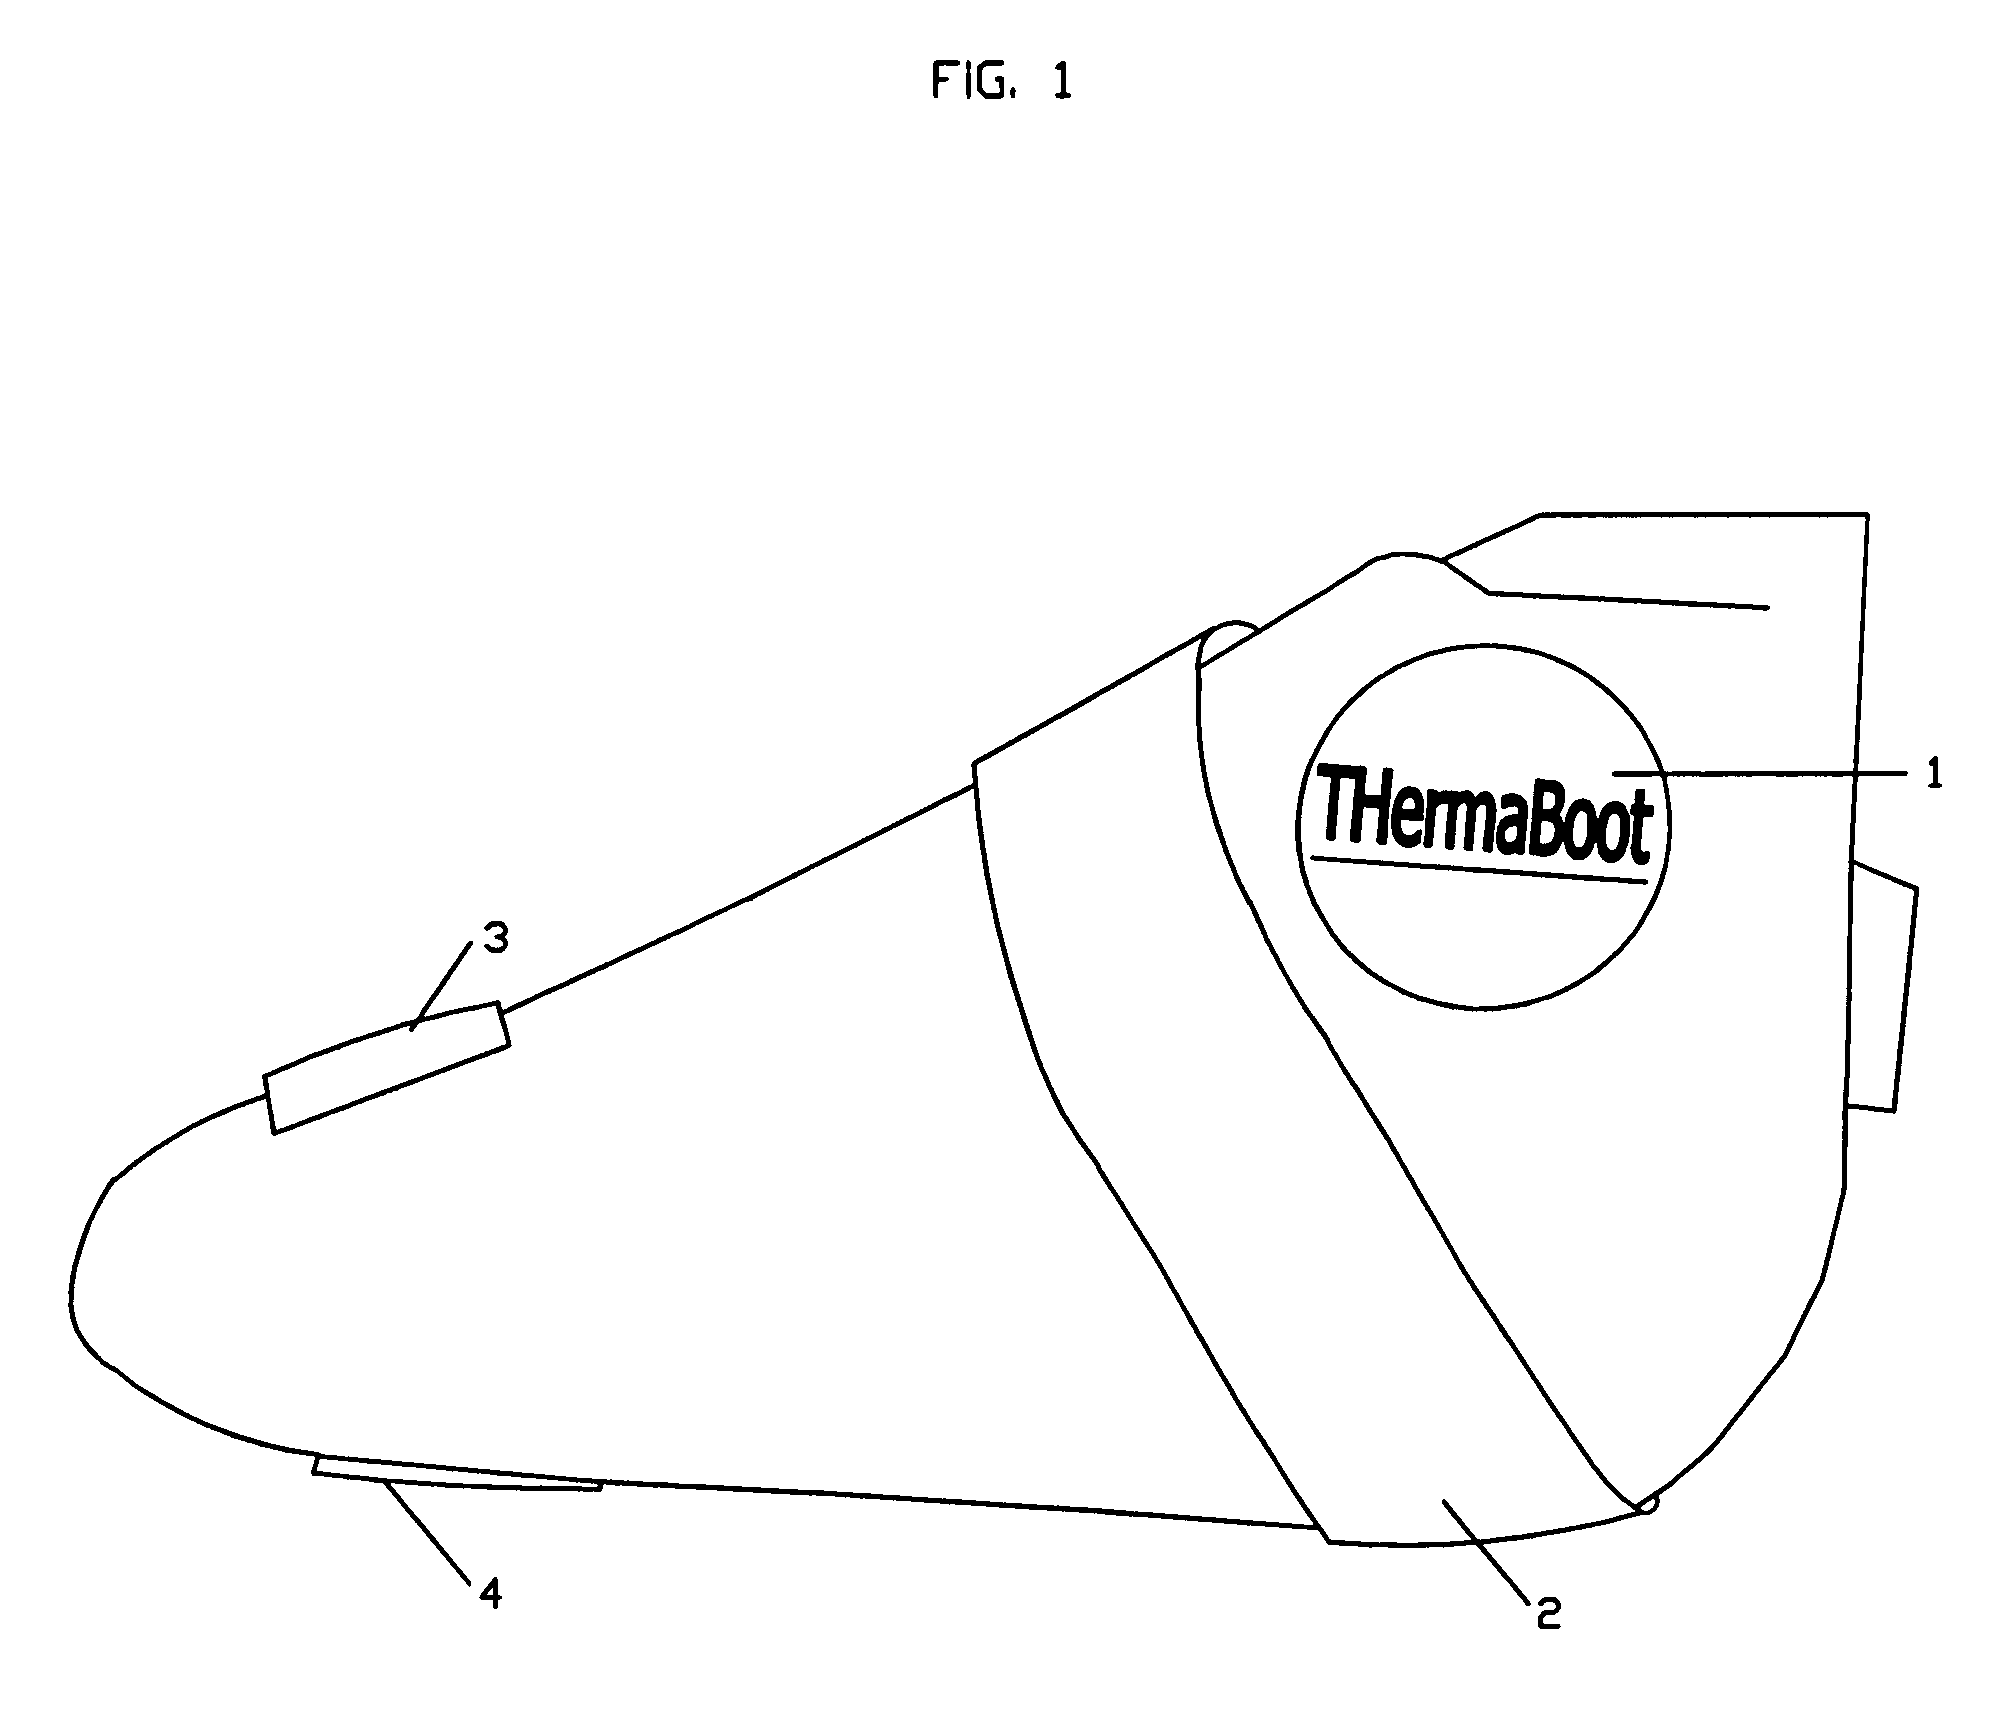 Non-ambulatory thermotherapy device for heat and cold therapy of the foot/ankle complex and hand/wrist complex